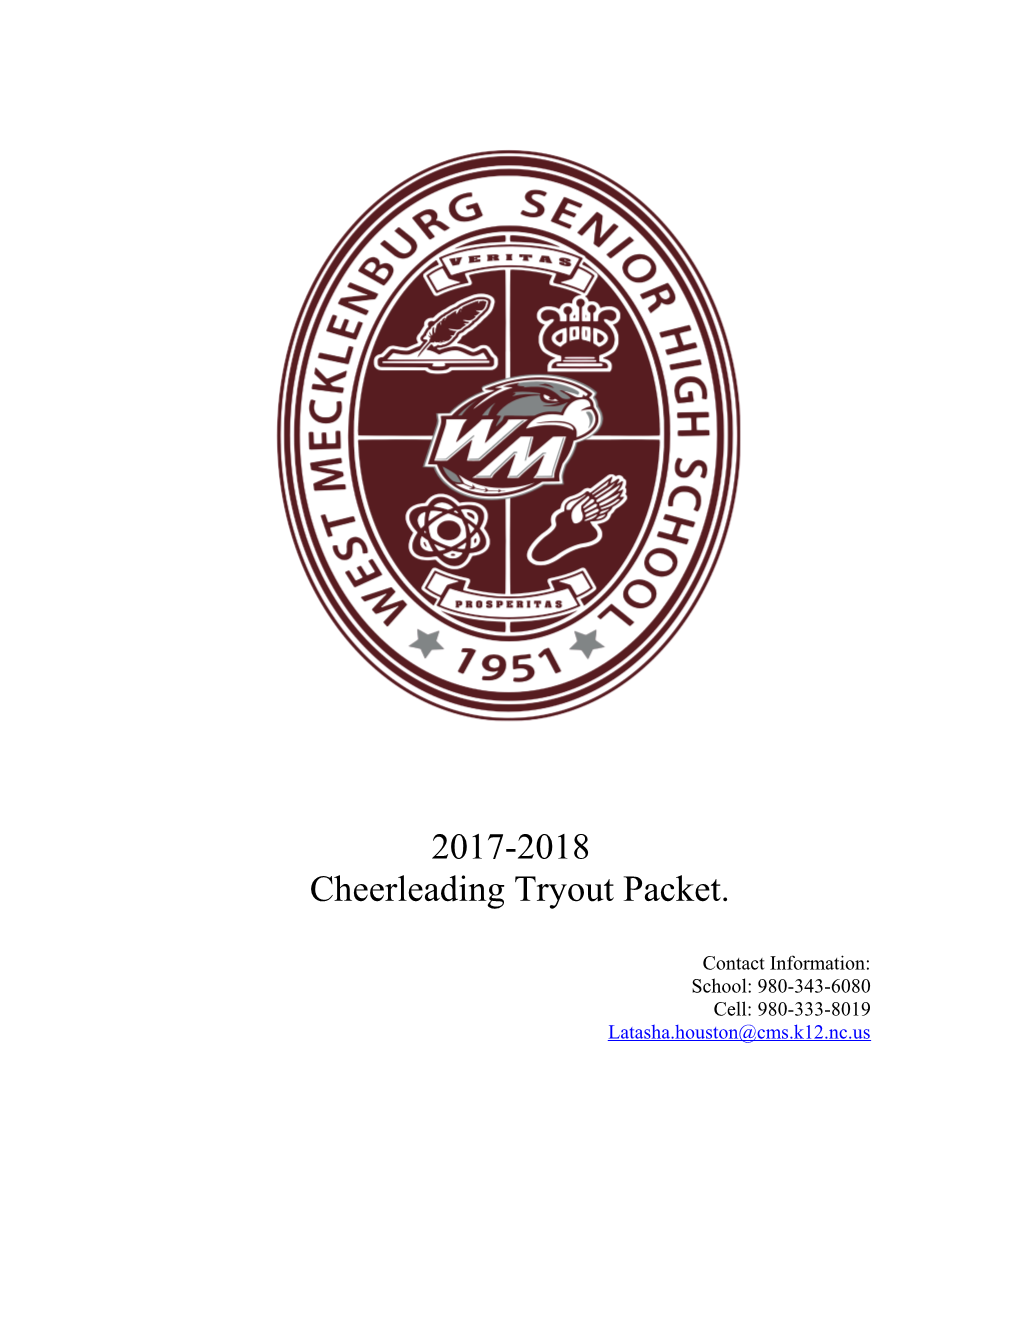 Cheerleading Tryout Packet